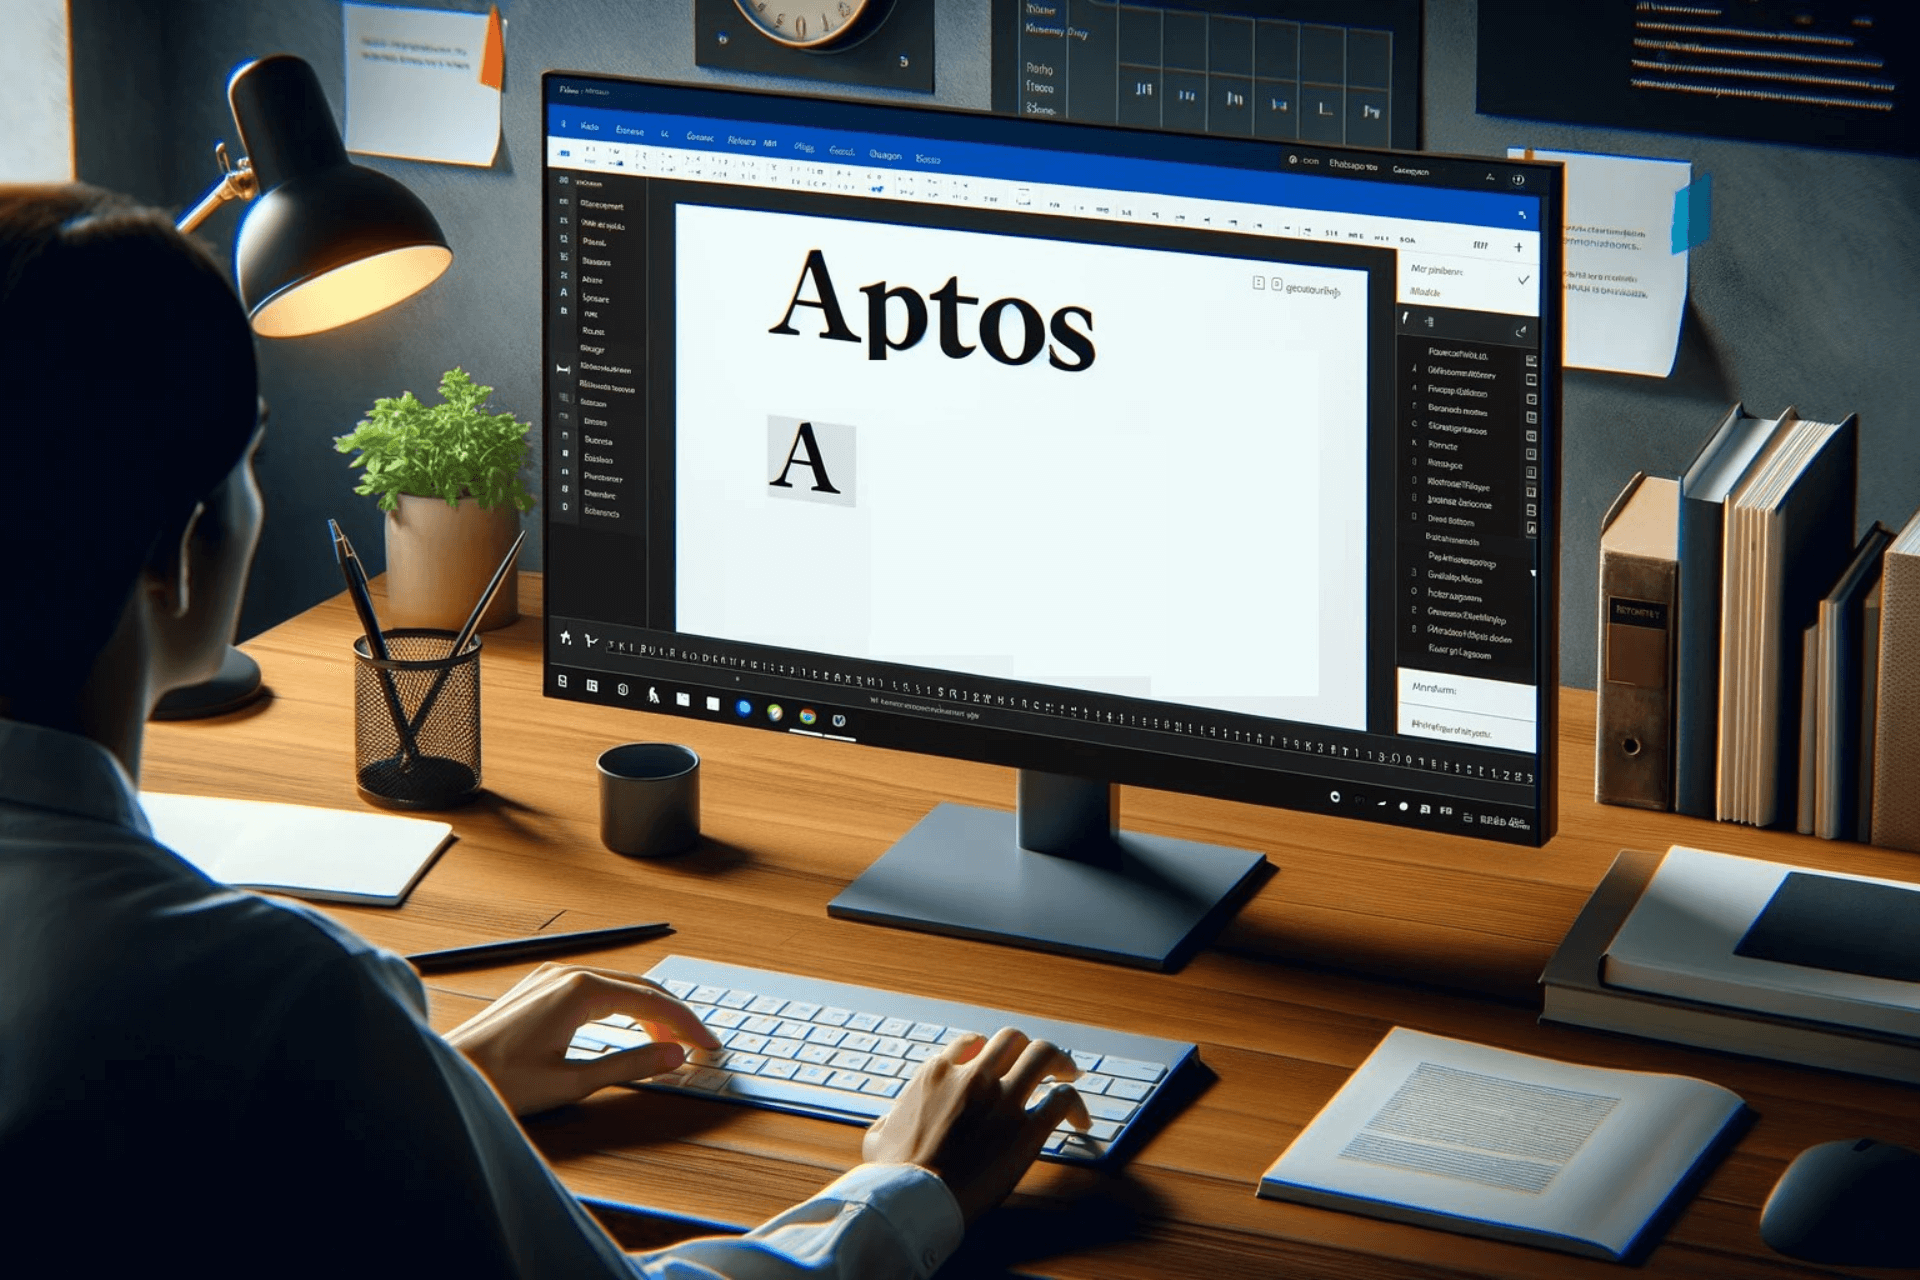 Aptos is the new default font for Microsoft